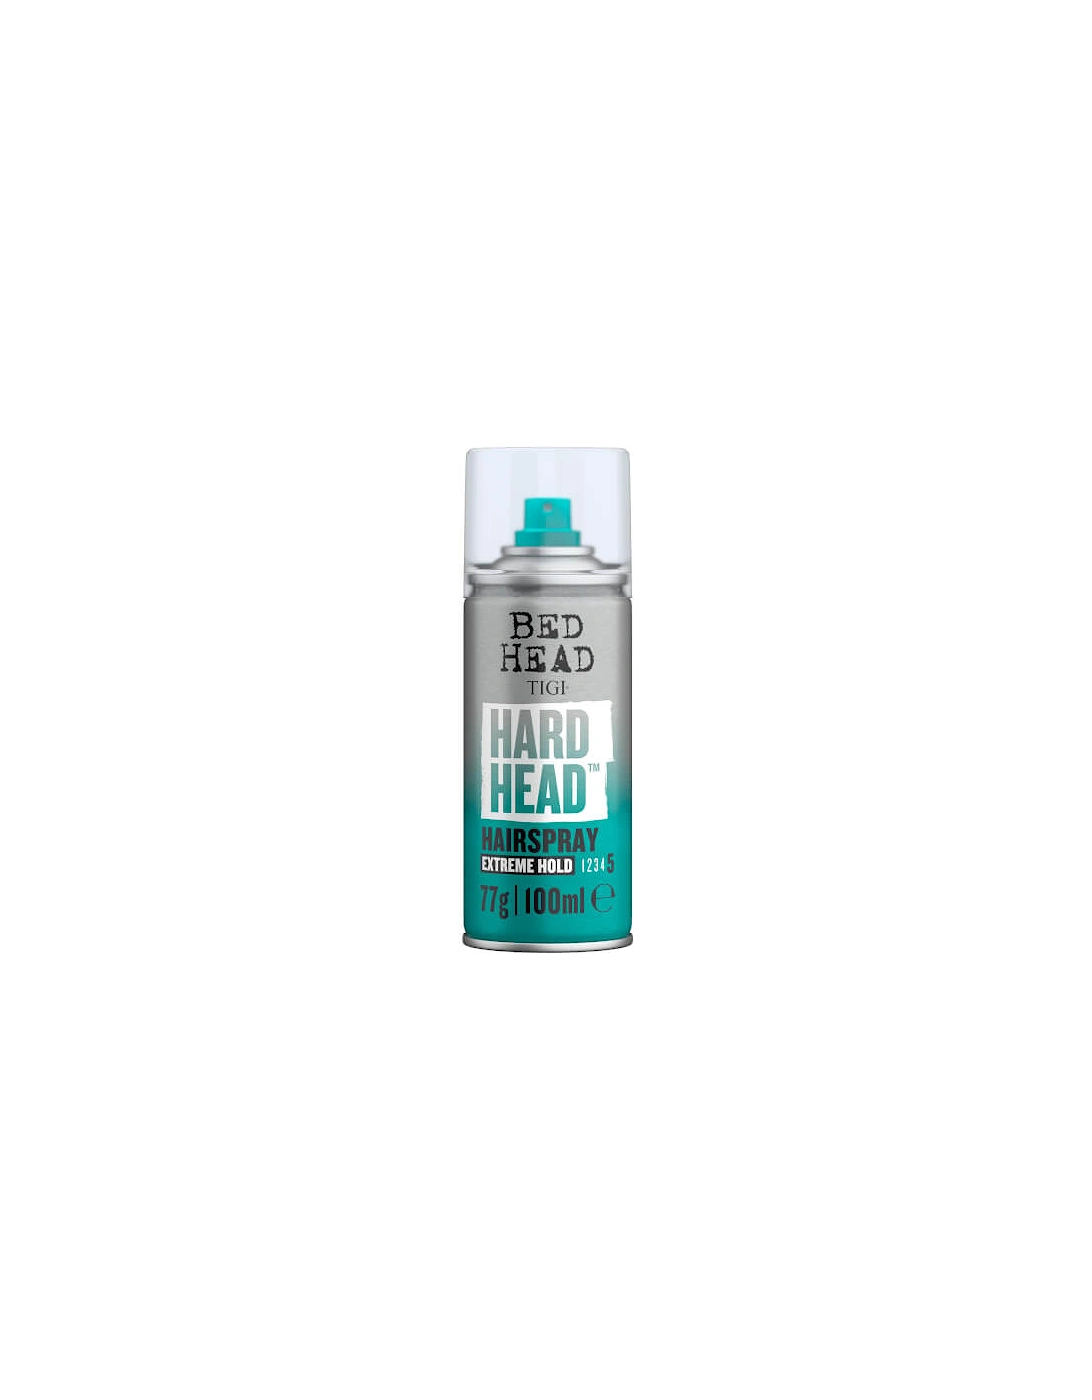 Bed Head Hard Head Hairspray for Extra Strong Hold Travel Size 100ml - TIGI, 2 of 1